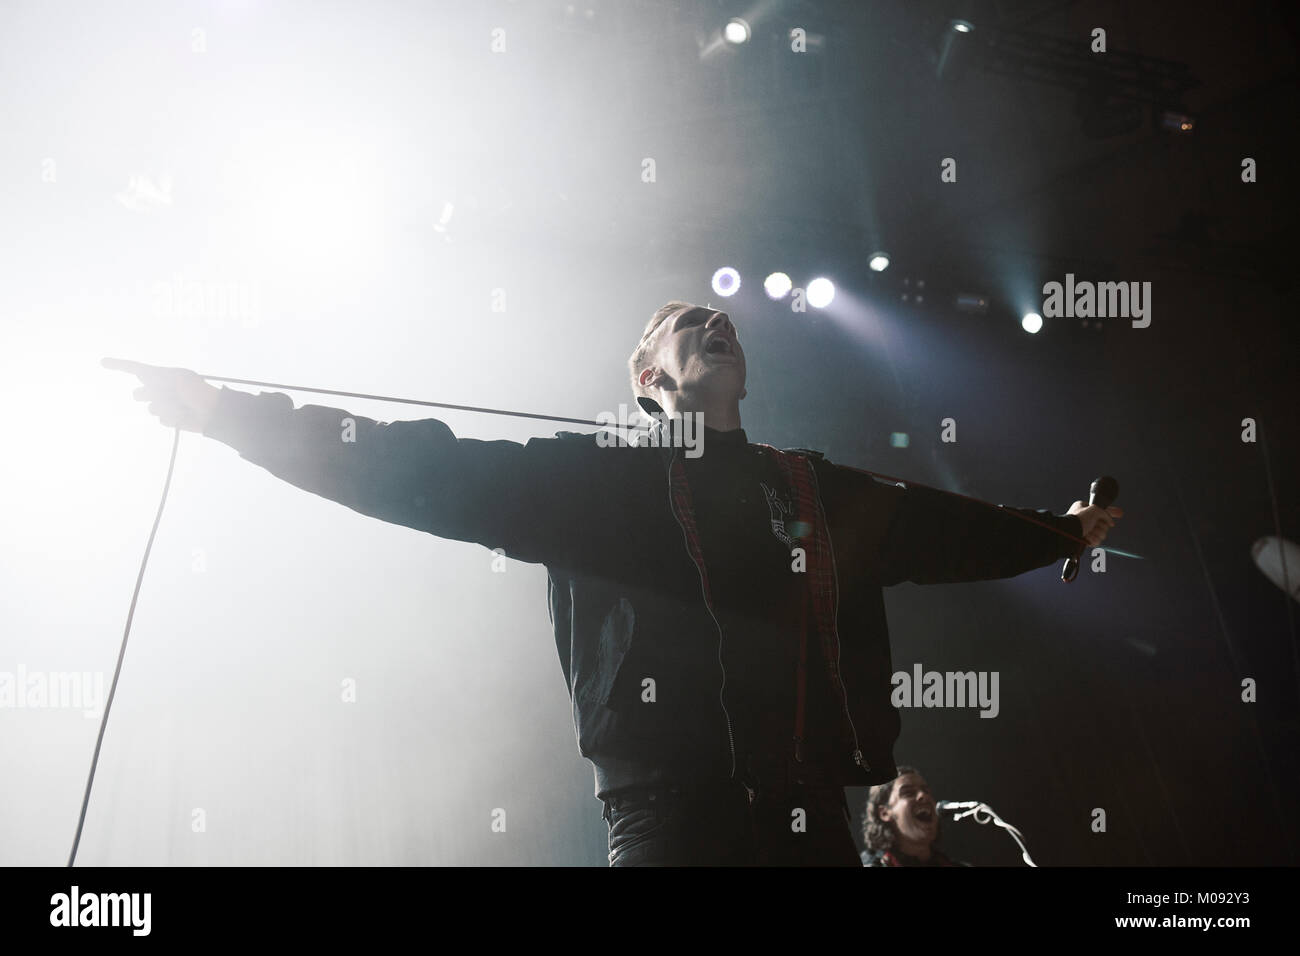 The German indie-rock band Kraftklub combines different genres such as rock and rap and here performs a live concert at Westfallenhalle in Dortmund as part of Visions 25th anniversary Club Edition. Here vocalist Felix Brummer is pictured live on stage. Germany, 25/10 2014. Stock Photo